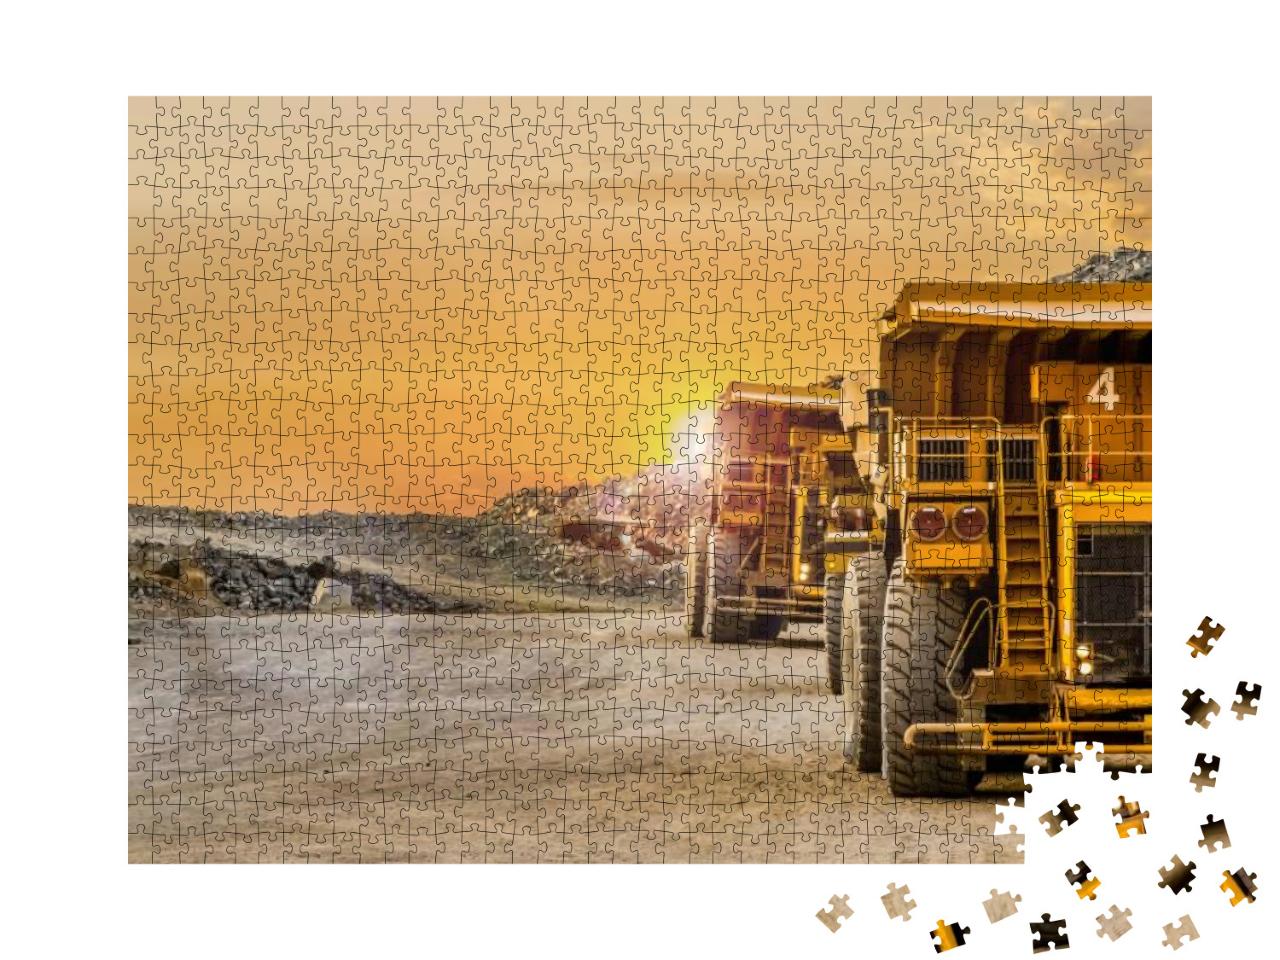 Large Yellow Dump Trucks Transporting Platinum Ore for Pr... Jigsaw Puzzle with 1000 pieces